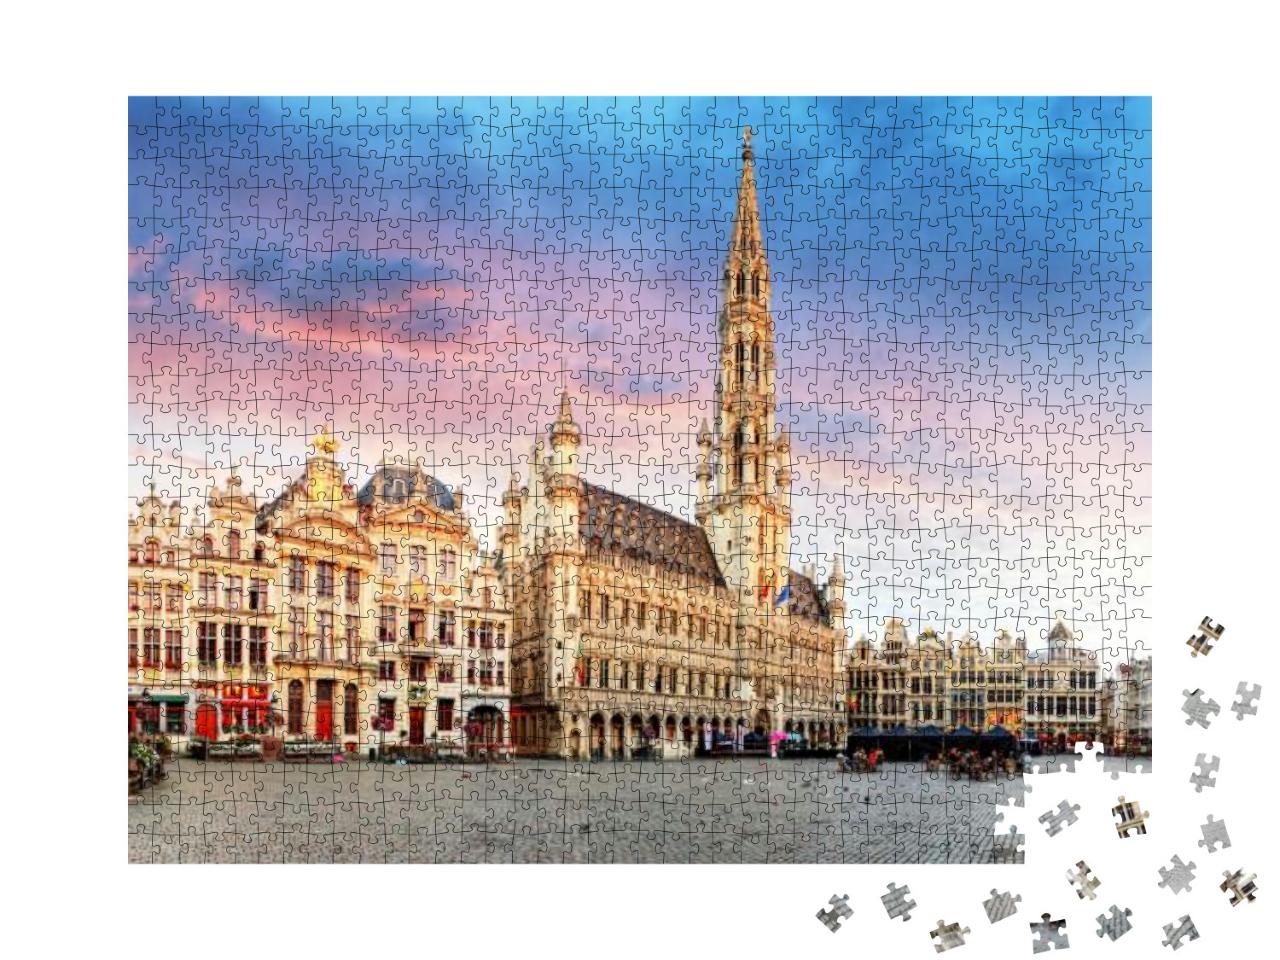 Brussels - Grand Place, Belgium... Jigsaw Puzzle with 1000 pieces